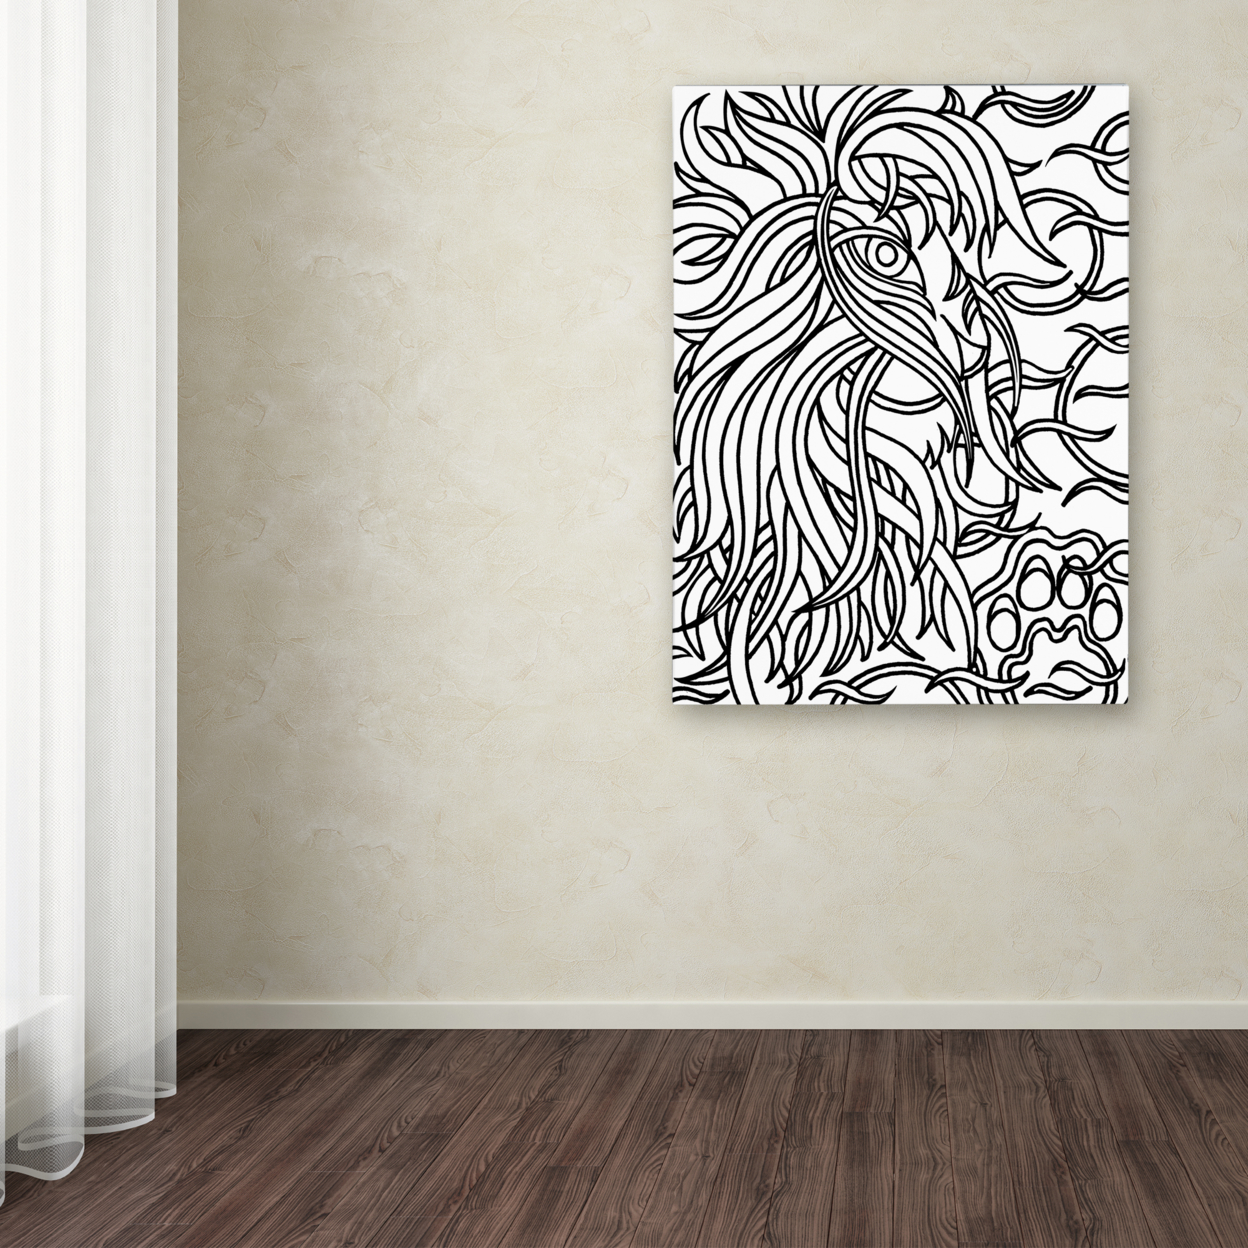 Kathy G. Ahrens 'Lester The Lion' Canvas Wall Art 35 X 47 Inches